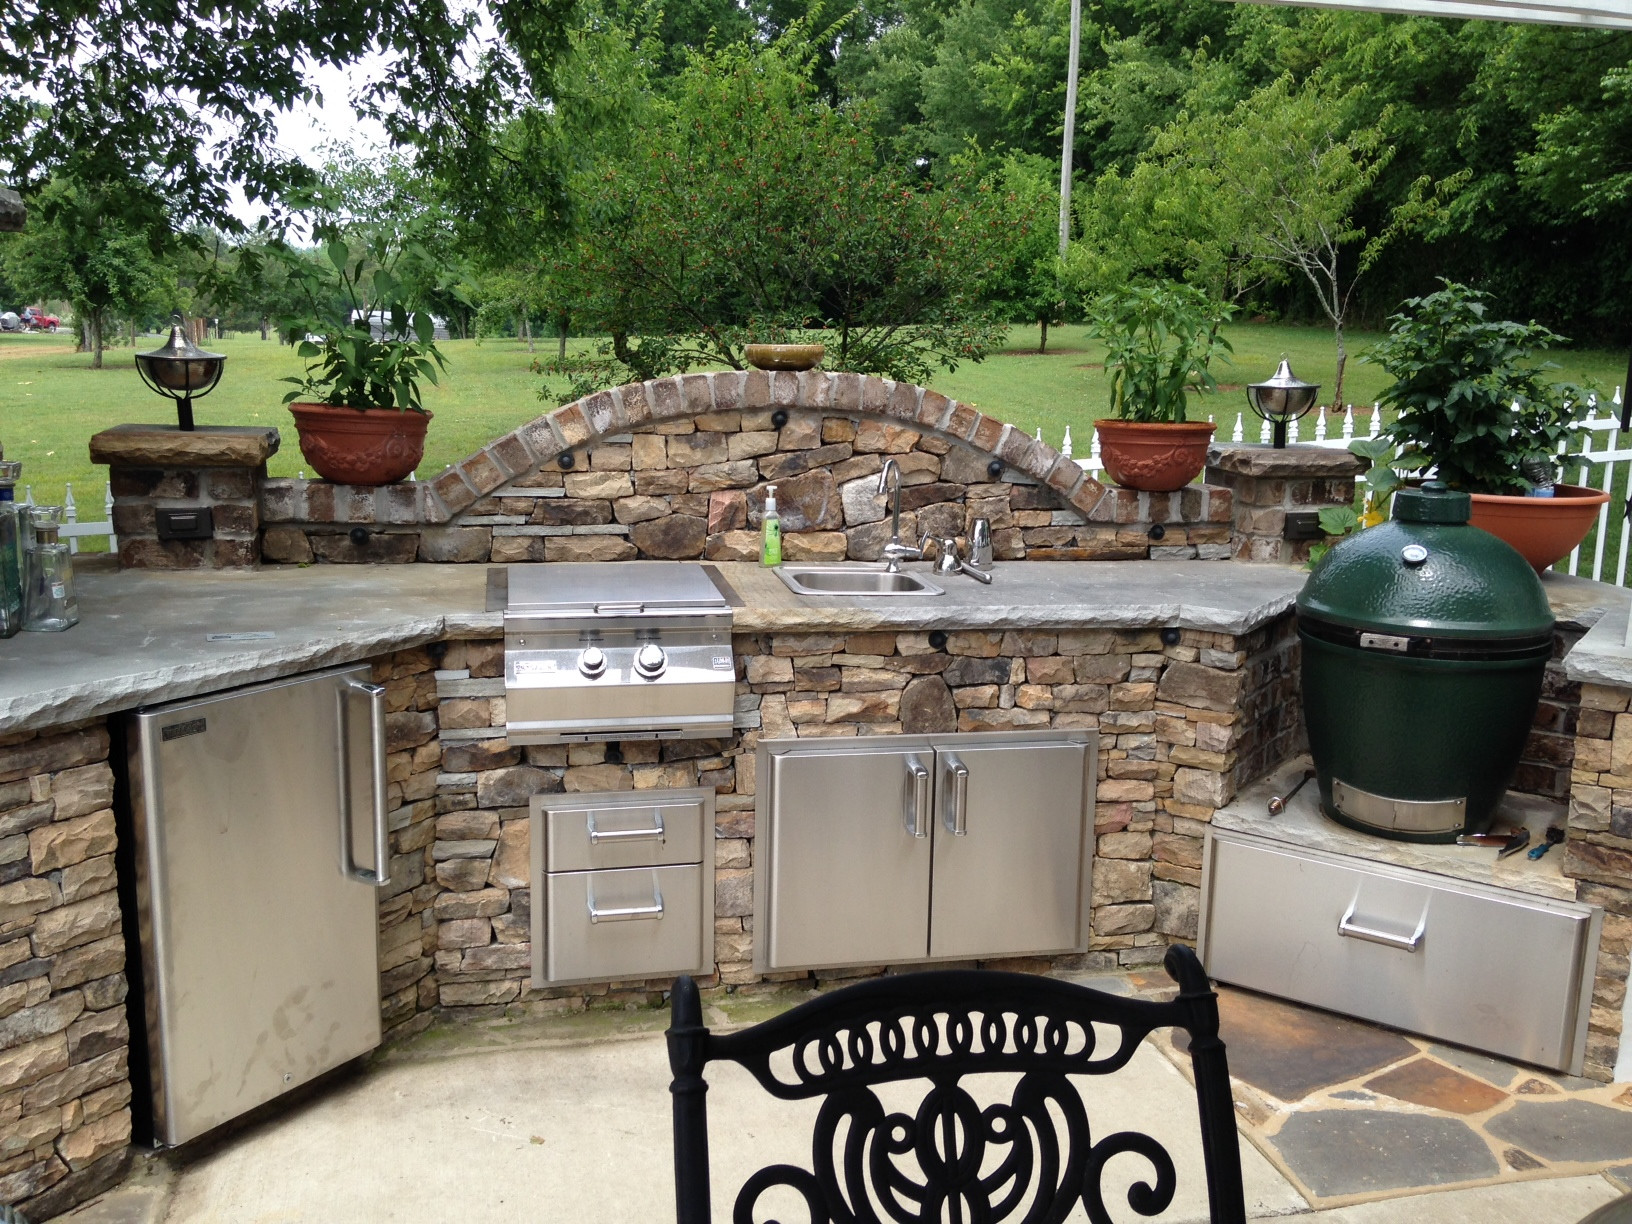 Outdoor Kitchen With Green Egg
 Big Green Egg Outdoor Kitchen